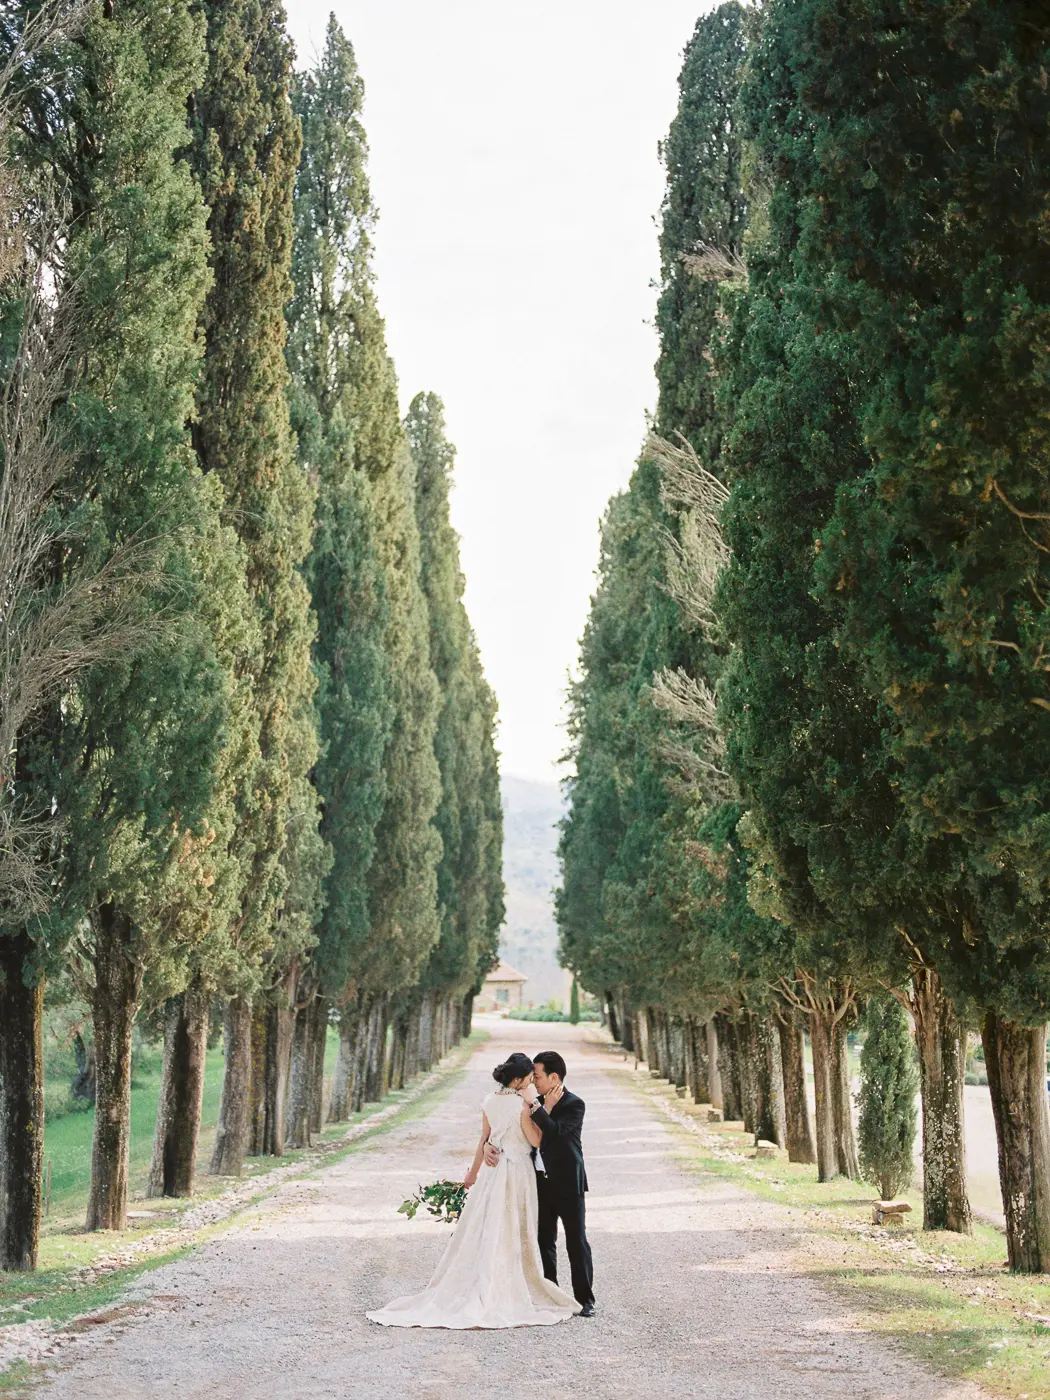 A panoramic view of the engaged couple against the picturesque scenery of Tuscany with iconic road with cypress trees